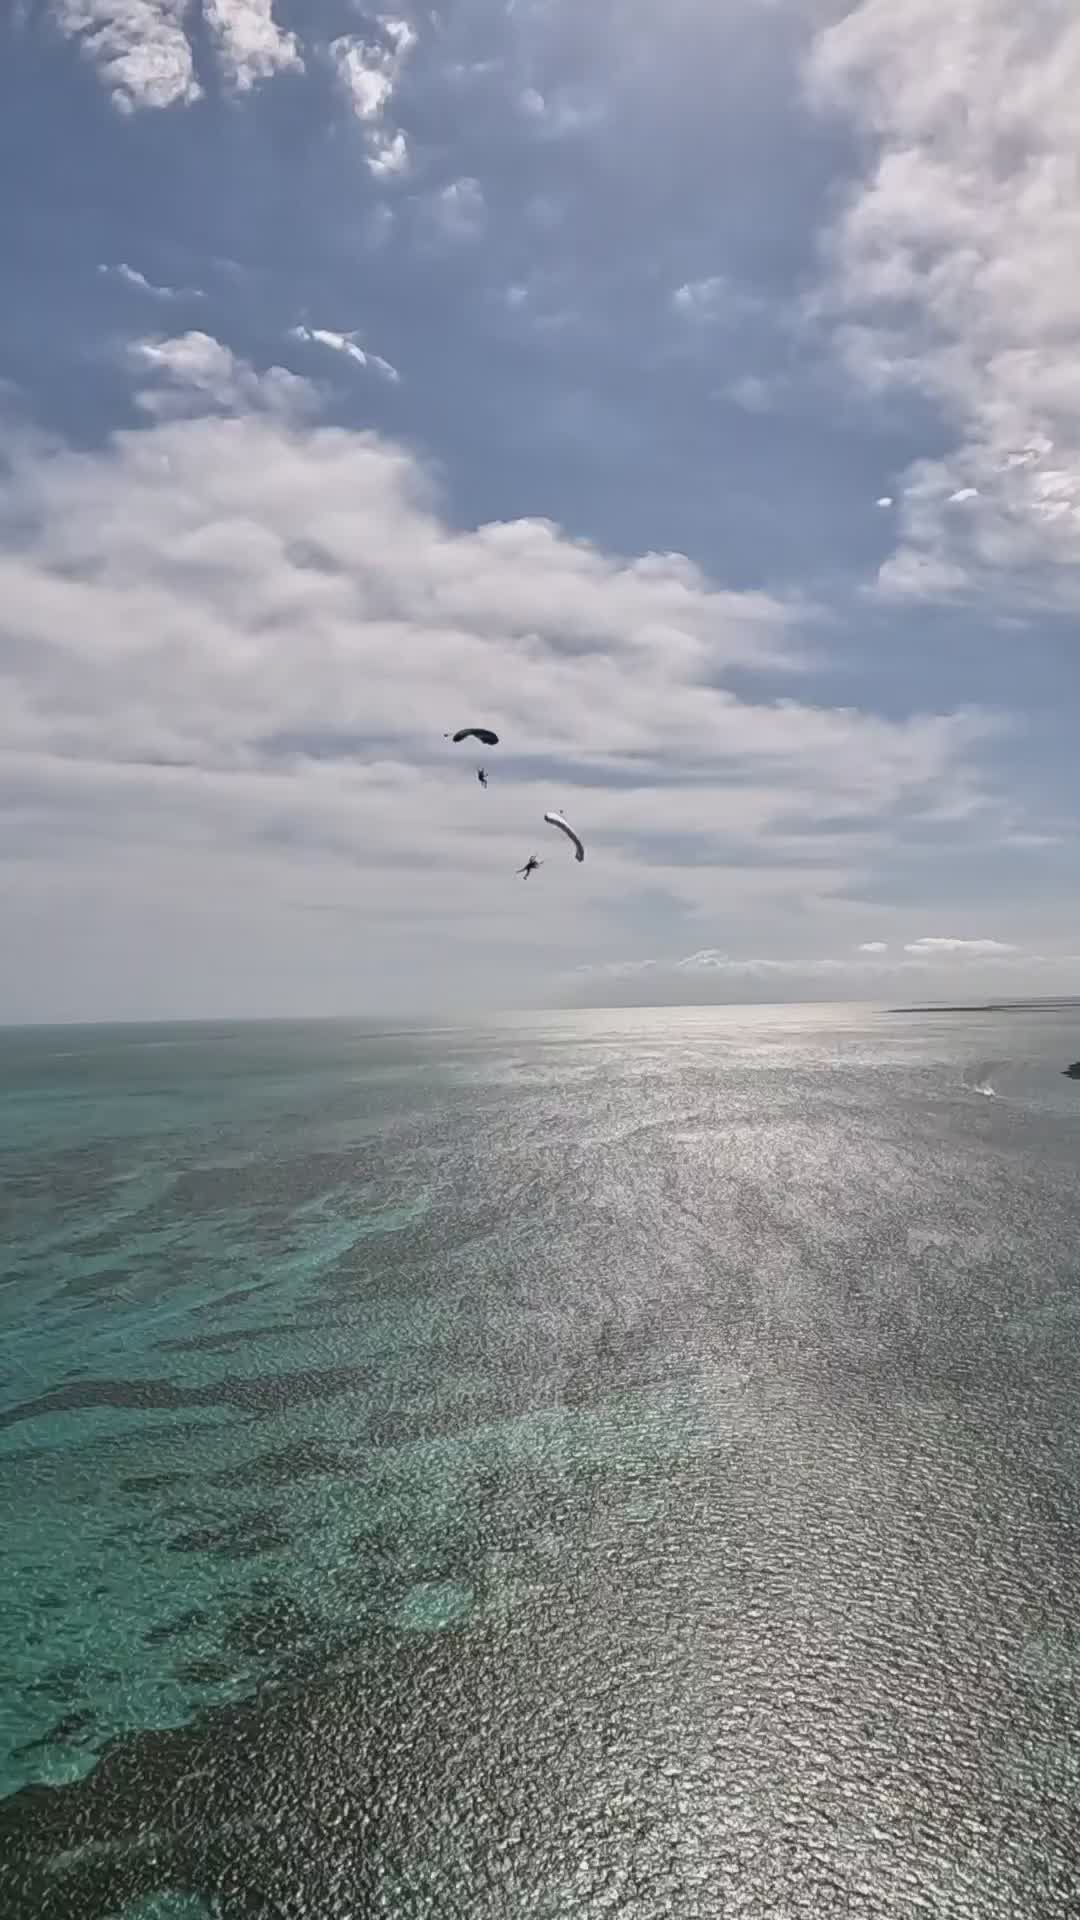 Skydiving Adventure in The Bahamas: Extreme Sports Fun